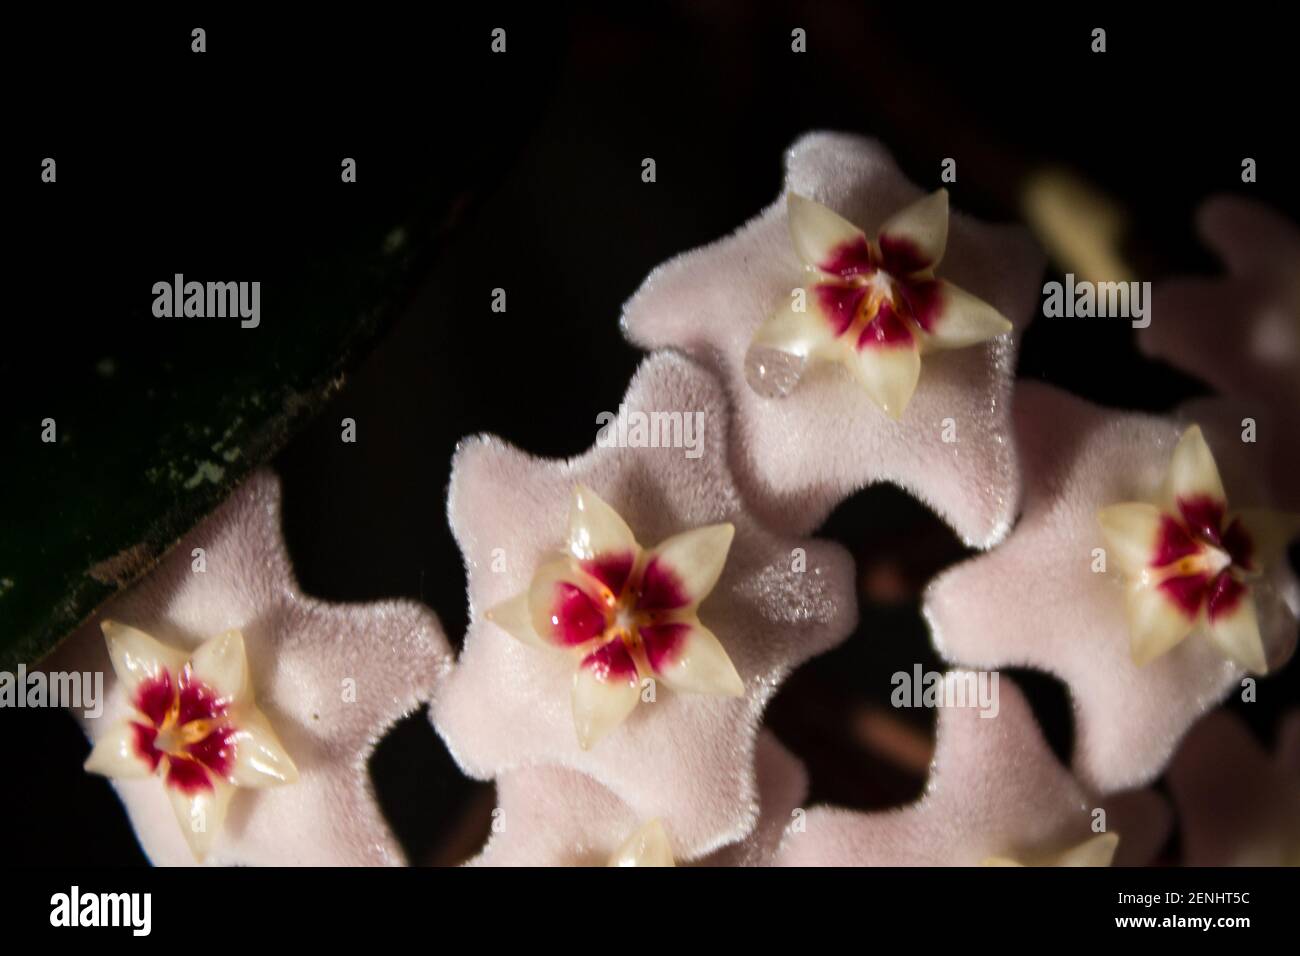 A cluster of the small pale pink flowers of the Hoya Carnosa, simply known as a Hoya Plant or wax Vine, against a black background Stock Photo